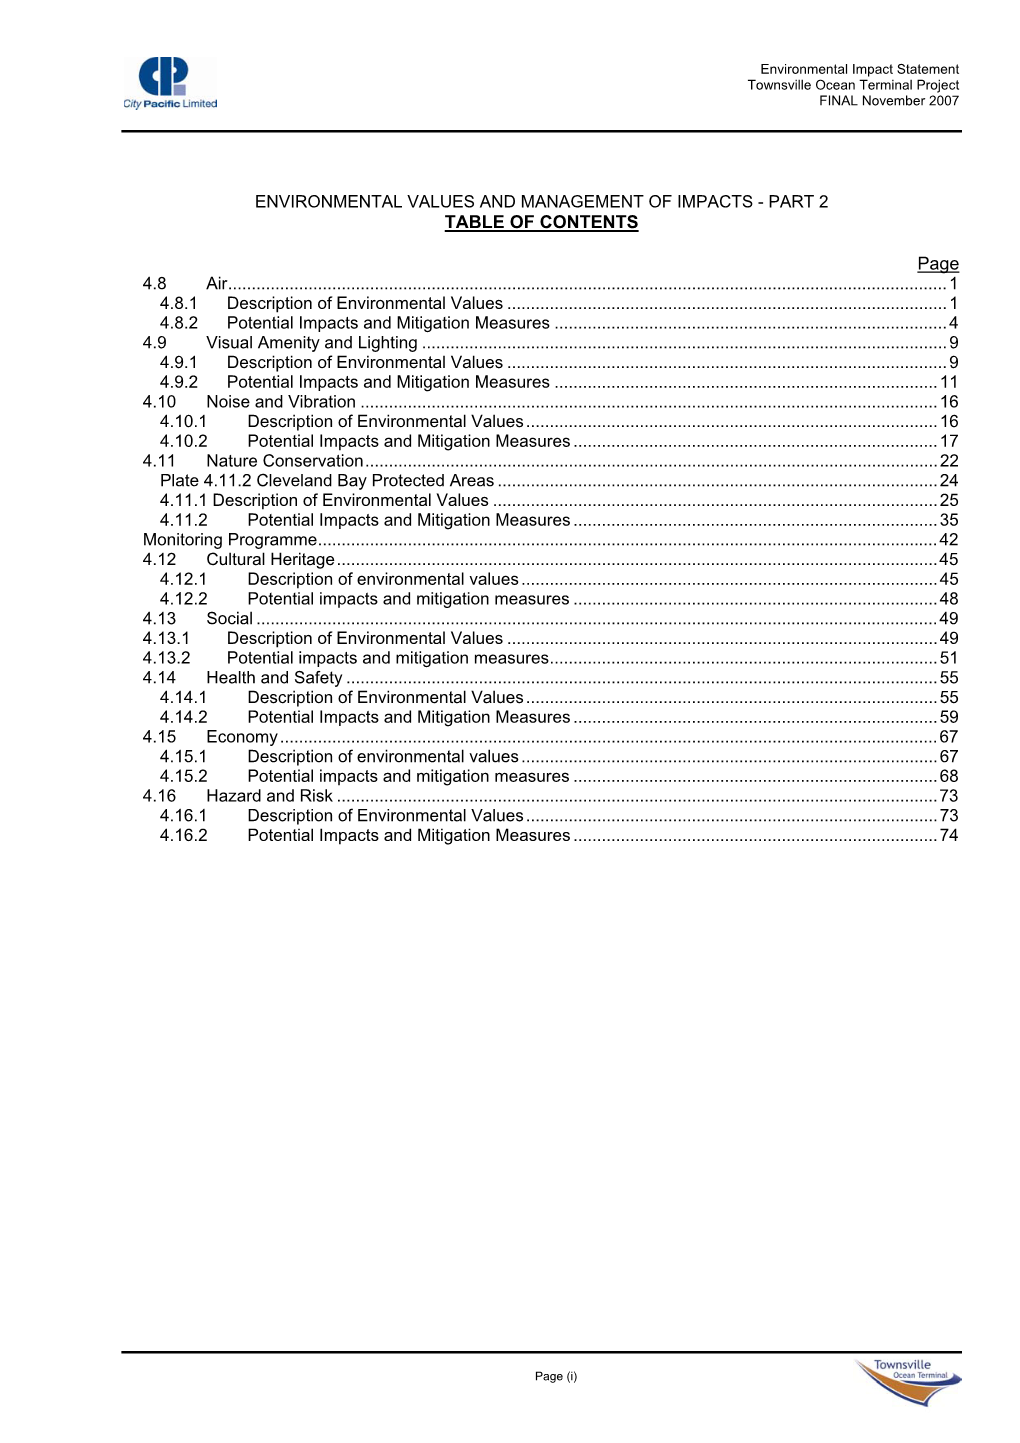 Environmental Values and Management of Impacts - Part 2 Table of Contents